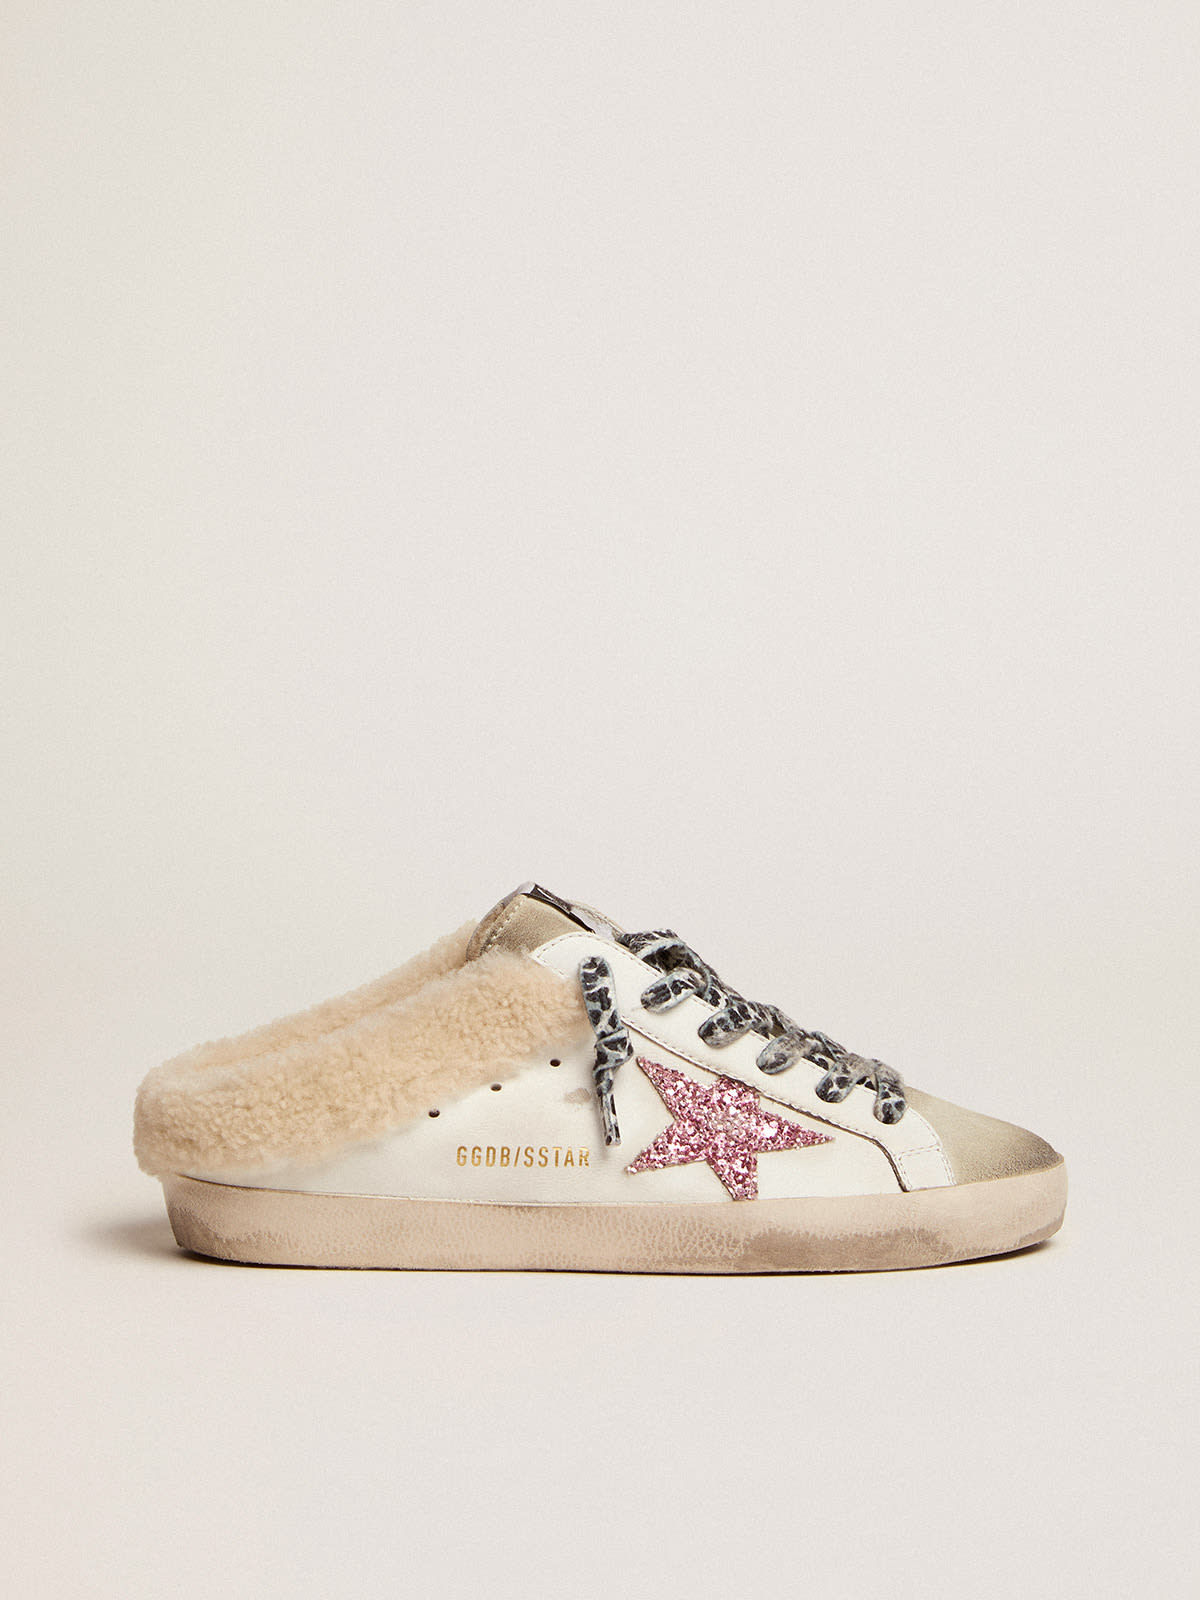 Women's Super-Star Sabot with pink glitter star and shearling lining